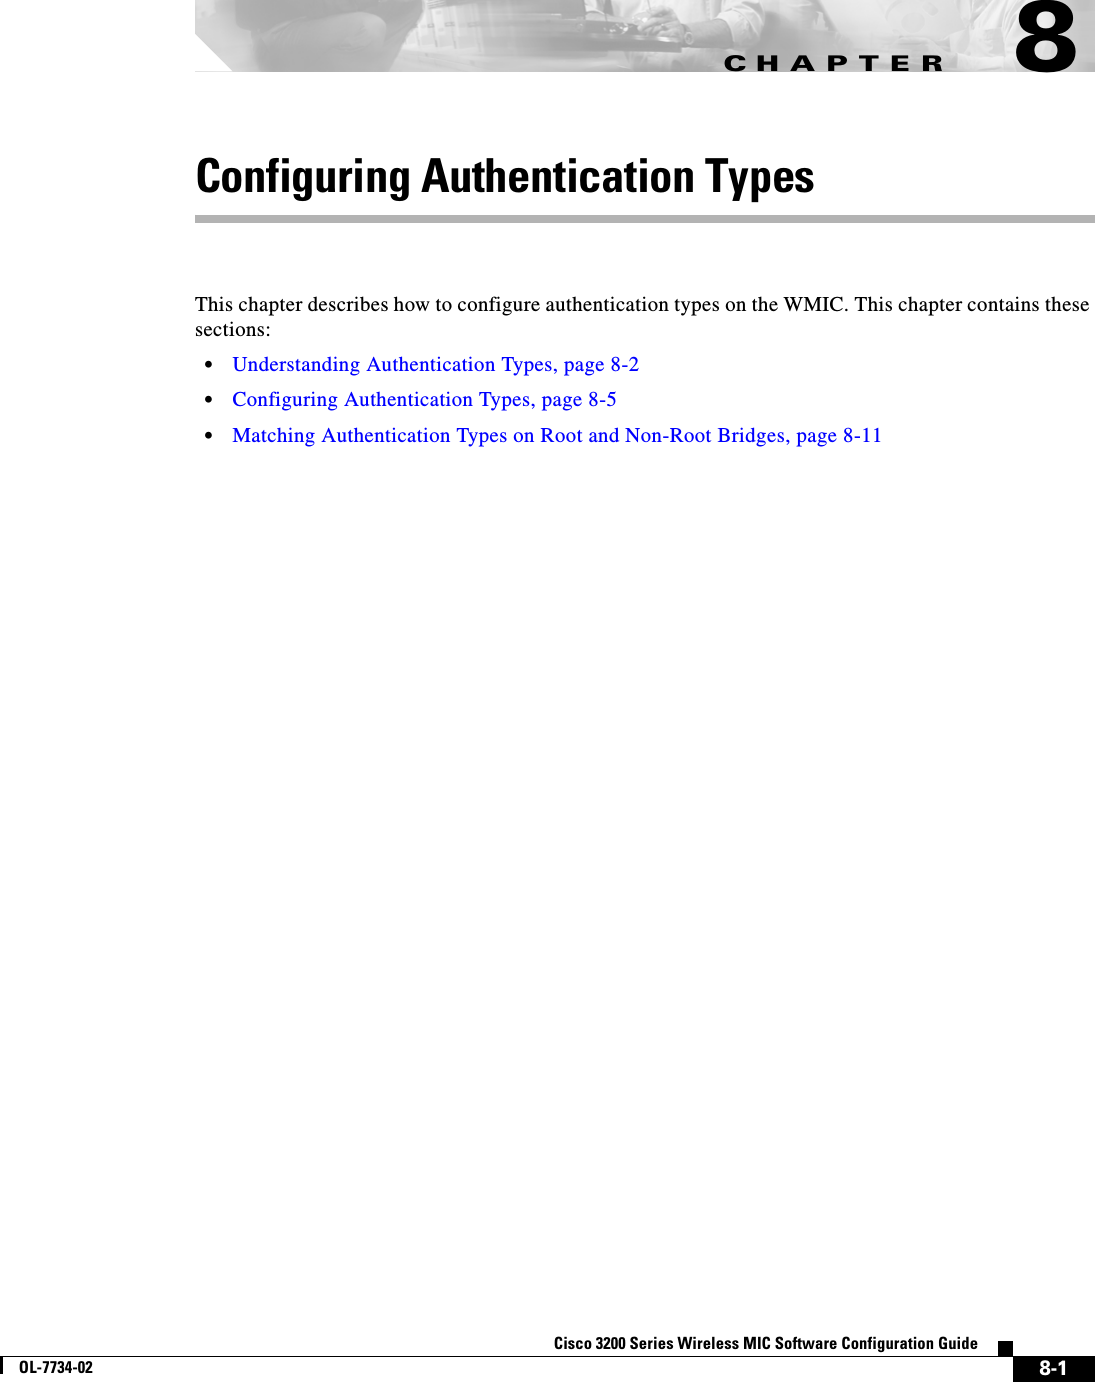 CHAPTER8-1Cisco 3200 Series Wireless MIC Software Configuration GuideOL-7734-028Configuring Authentication TypesThis chapter describes how to configure authentication types on the WMIC. This chapter contains these sections:•Understanding Authentication Types, page 8-2•Configuring Authentication Types, page 8-5•Matching Authentication Types on Root and Non-Root Bridges, page 8-11